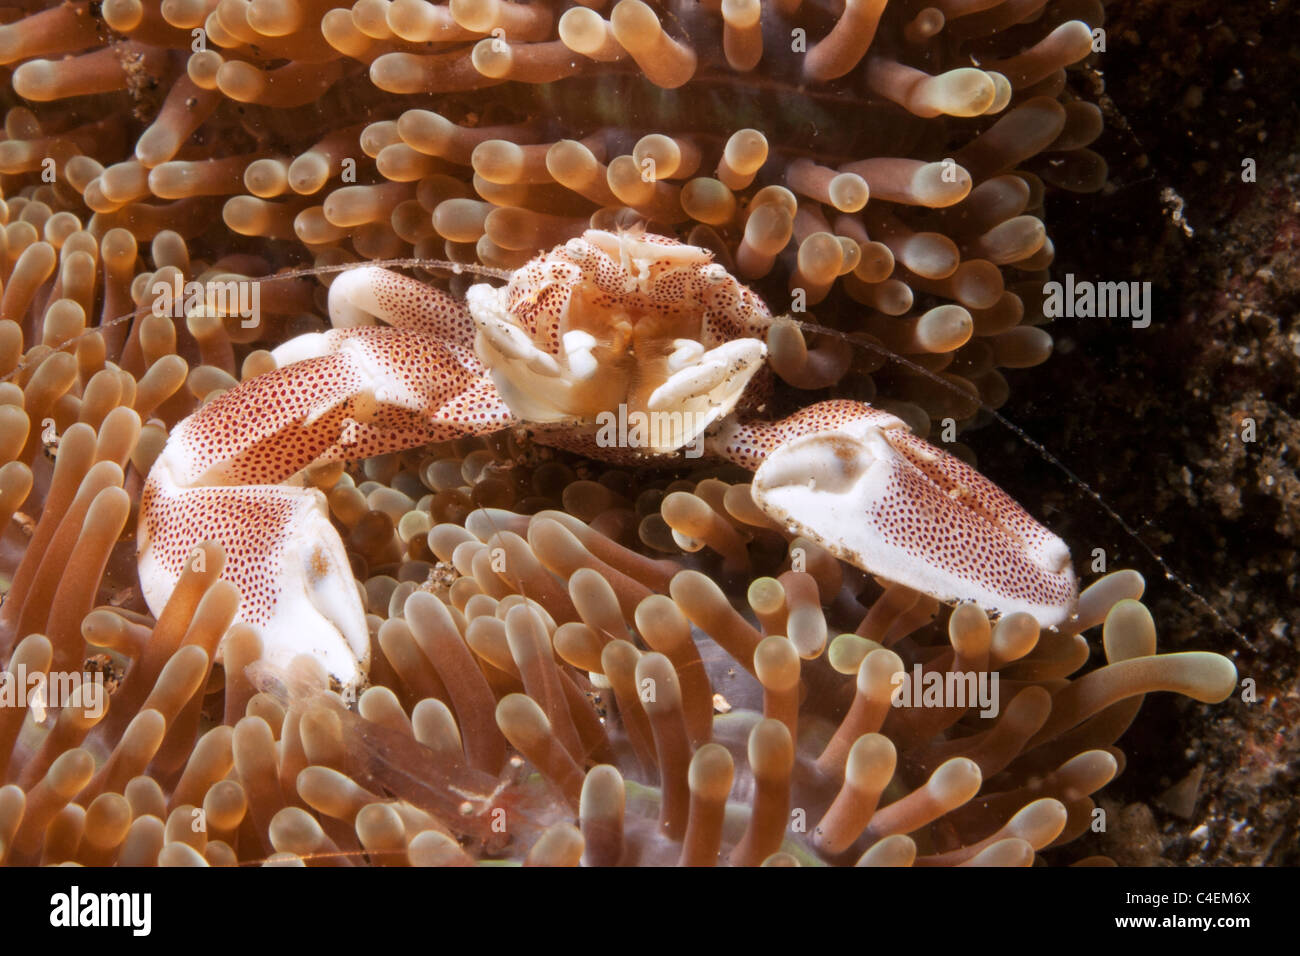 Spotted Porcelain Crab lives on a Sea Anemone.(Neopetrolisthes maculatus).Lembeh Staits,Indonesia Stock Photo